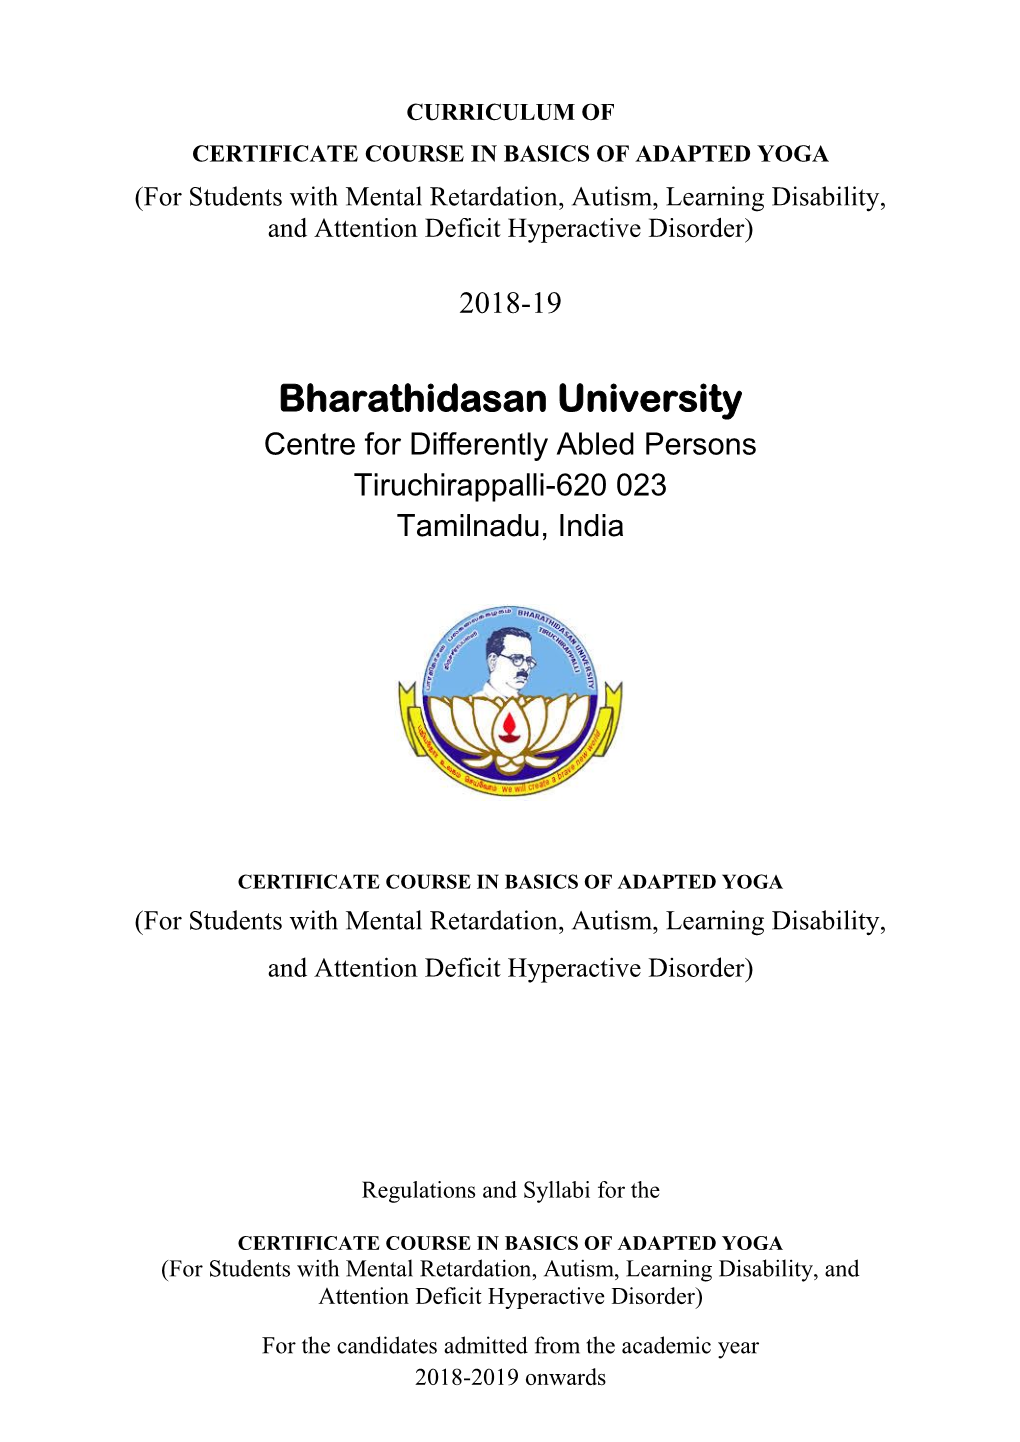 CERTIFICATE COURSE in BASICS of ADAPTED YOGA (For Students with Mental Retardation, Autism, Learning Disability, and Attention Deficit Hyperactive Disorder)